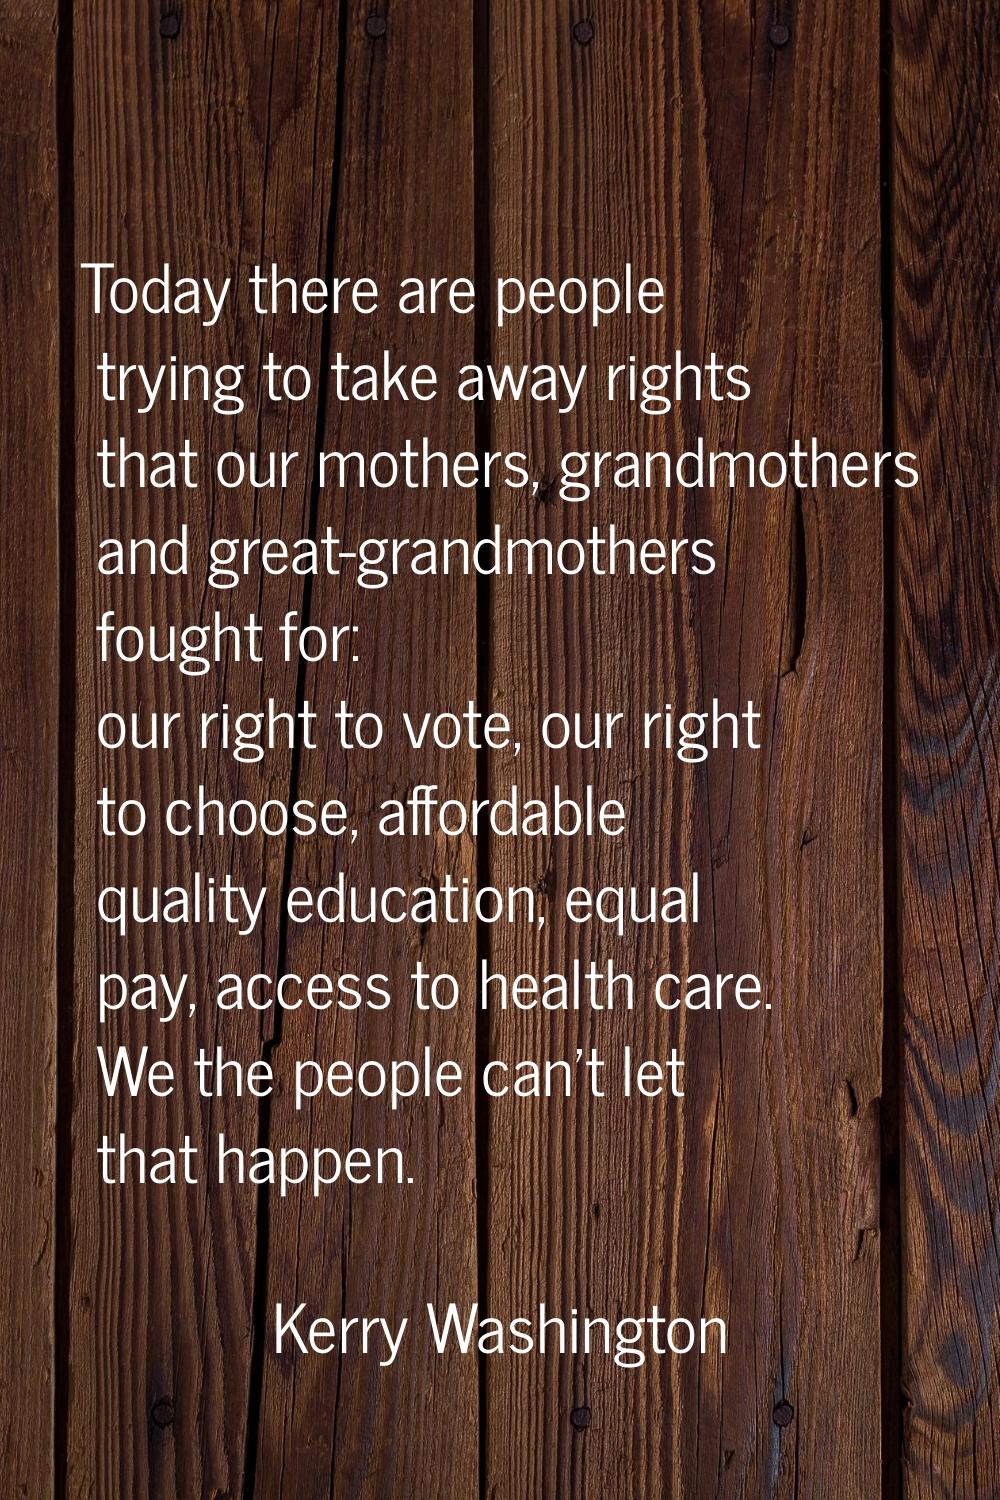 Today there are people trying to take away rights that our mothers, grandmothers and great-grandmot